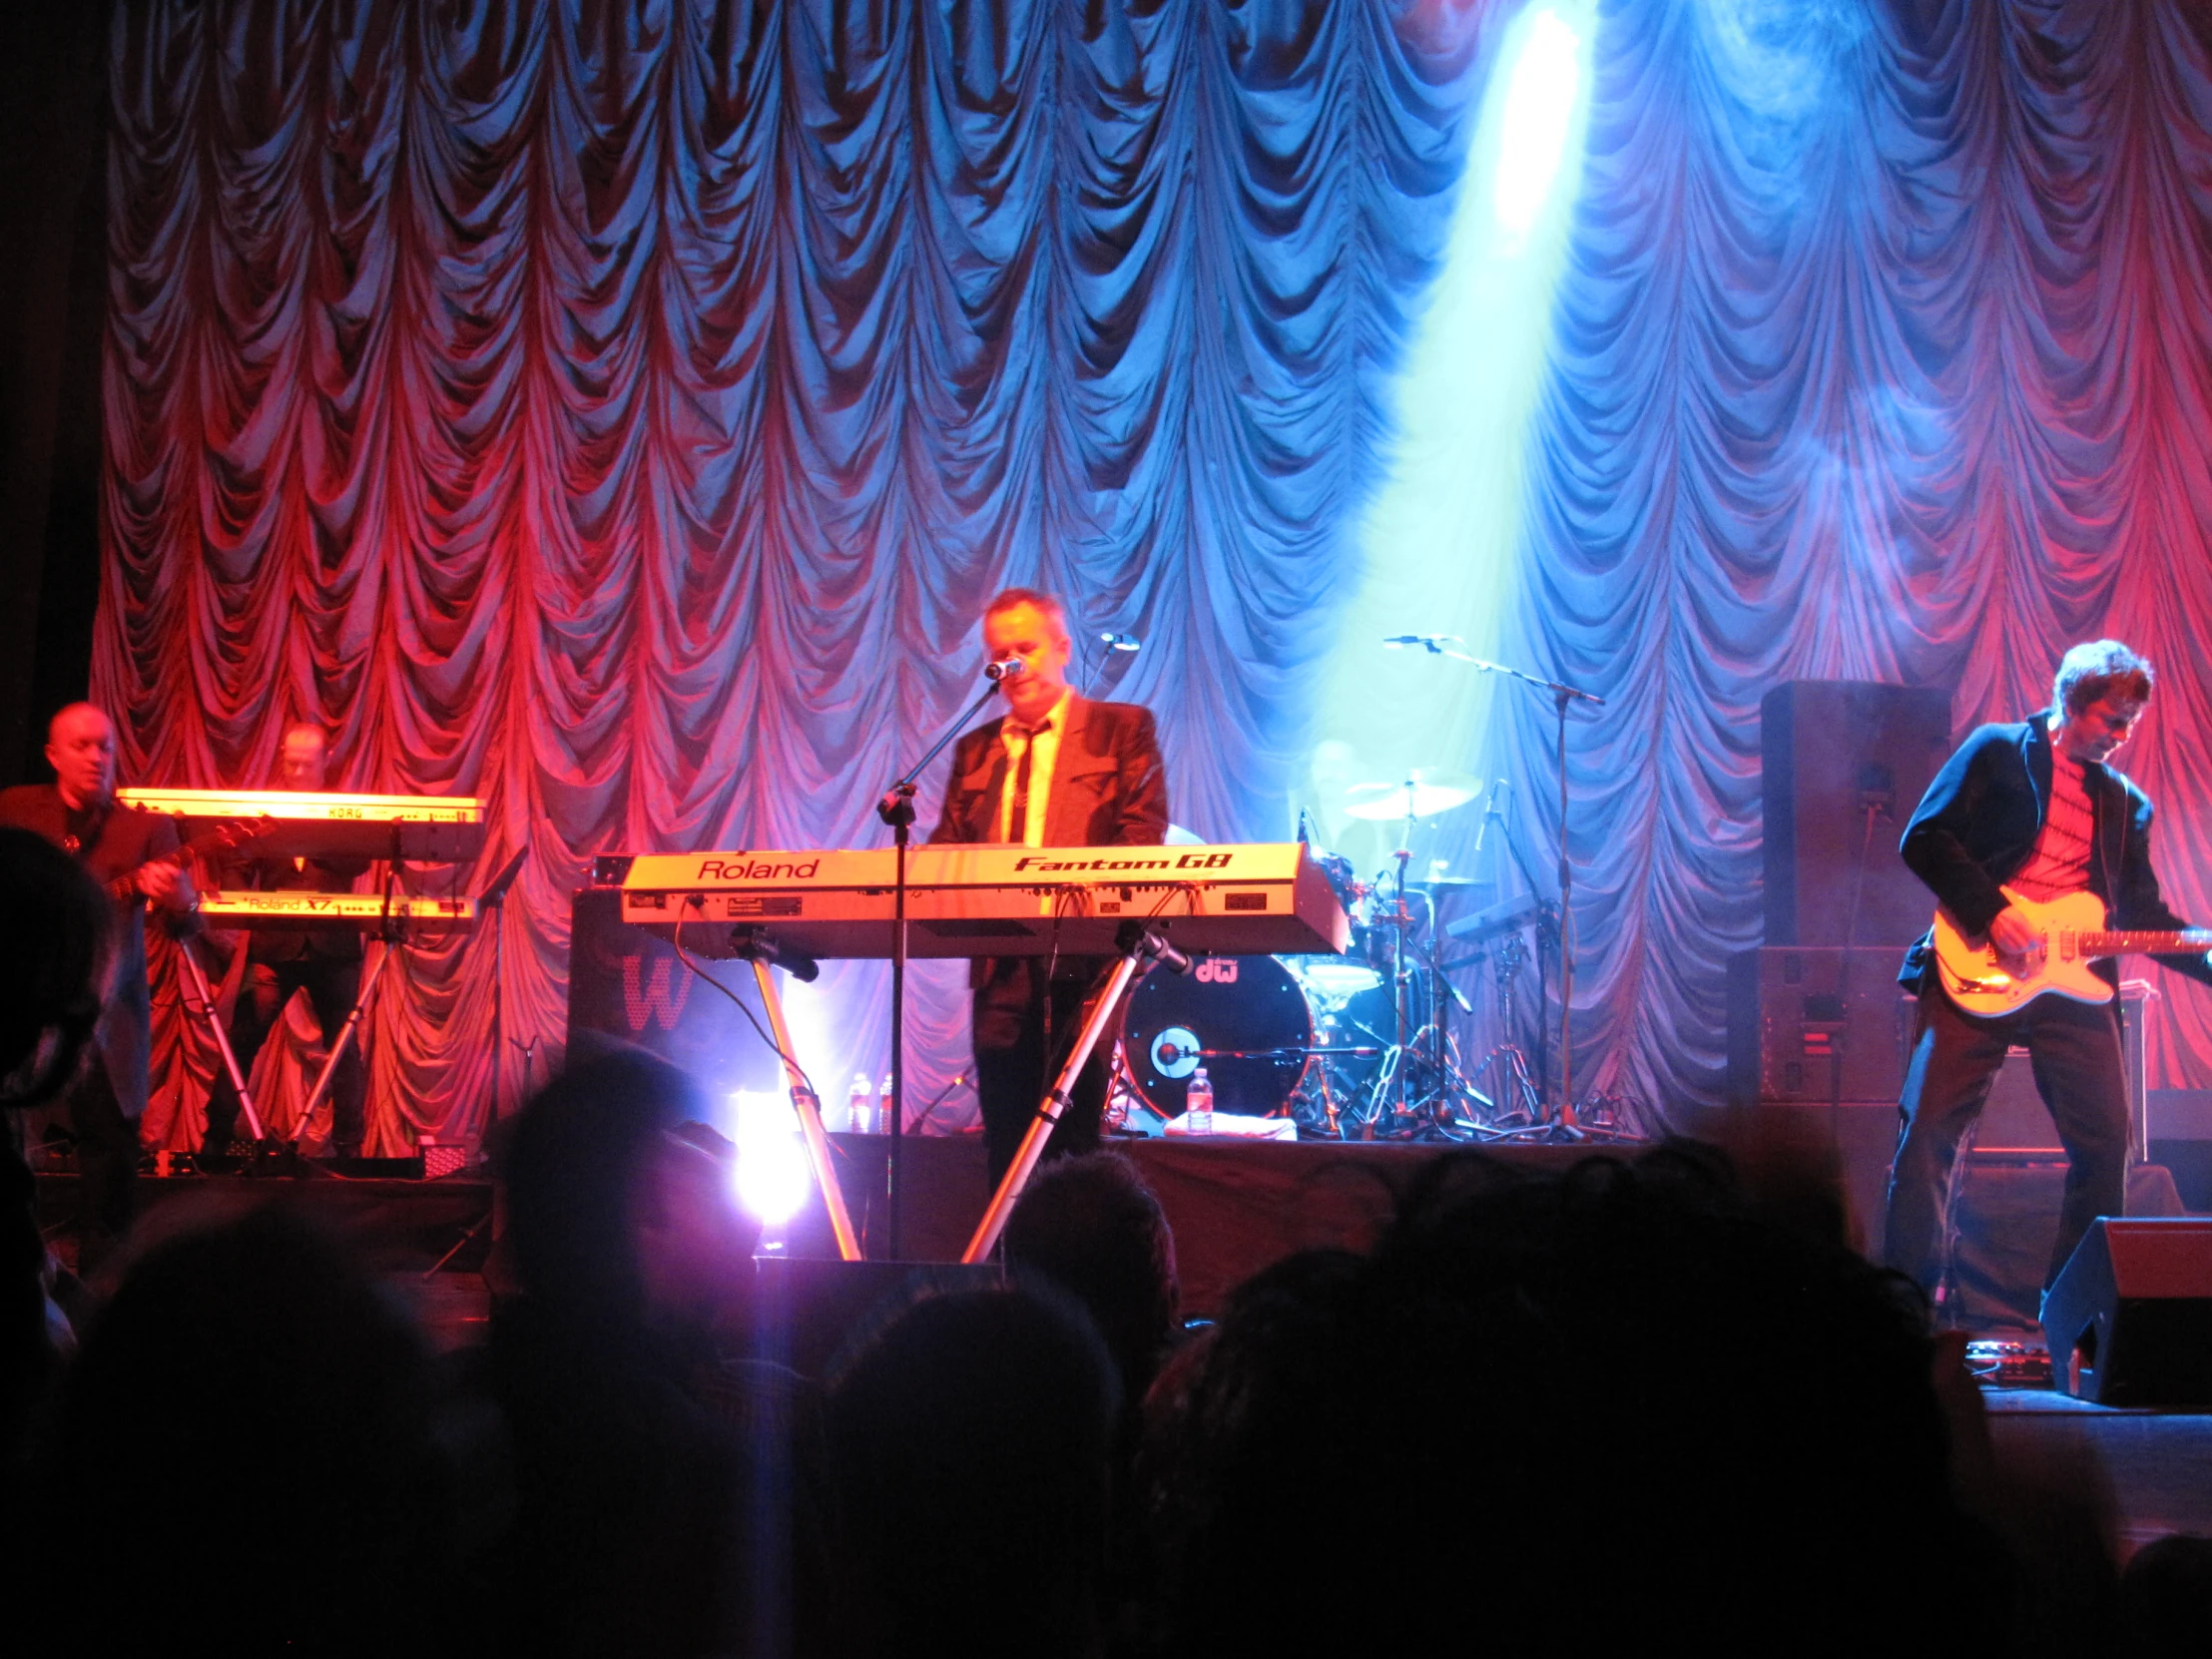 some people on stage playing music on a keyboard